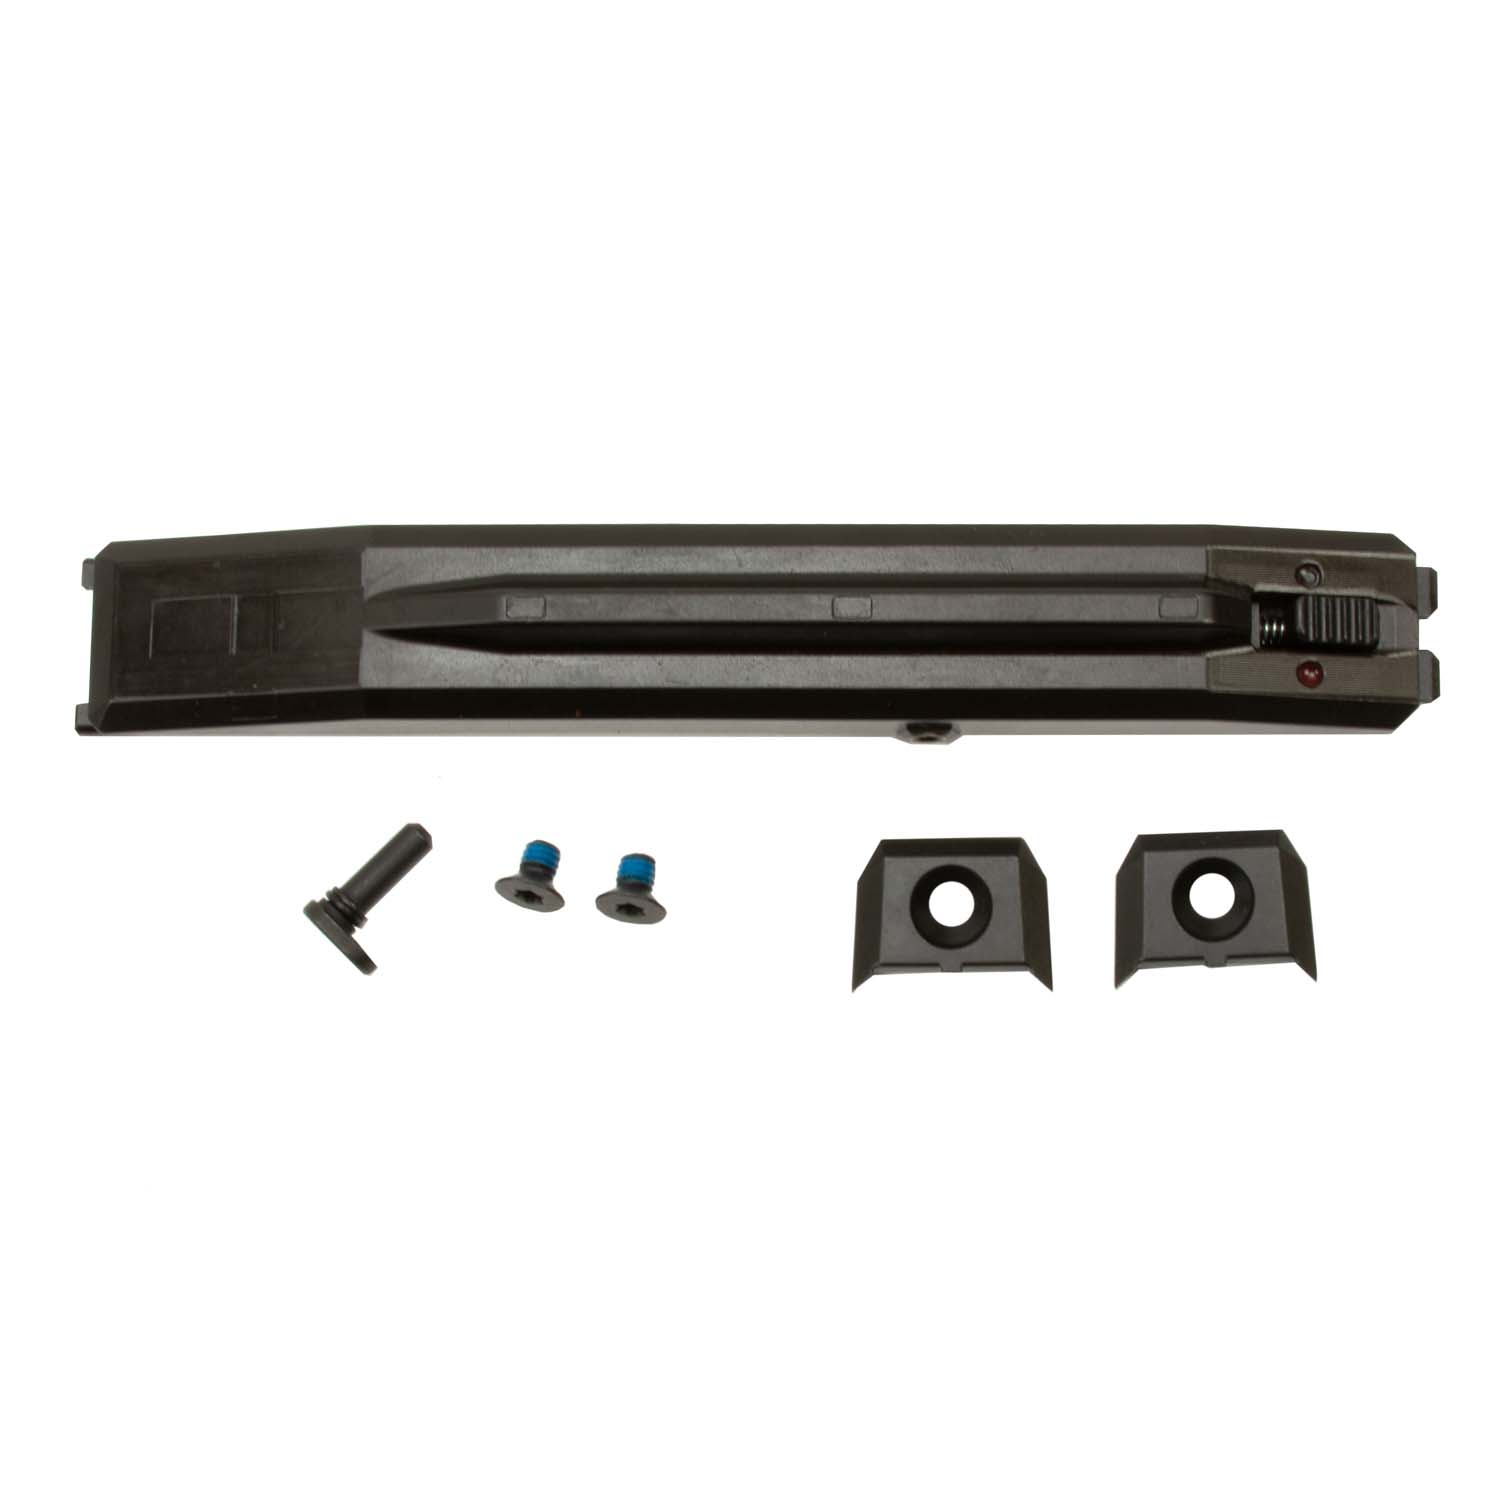 Desert Tech Mdrx Chassis Upgrade Kit Side Eject To Forward Eject Mgw